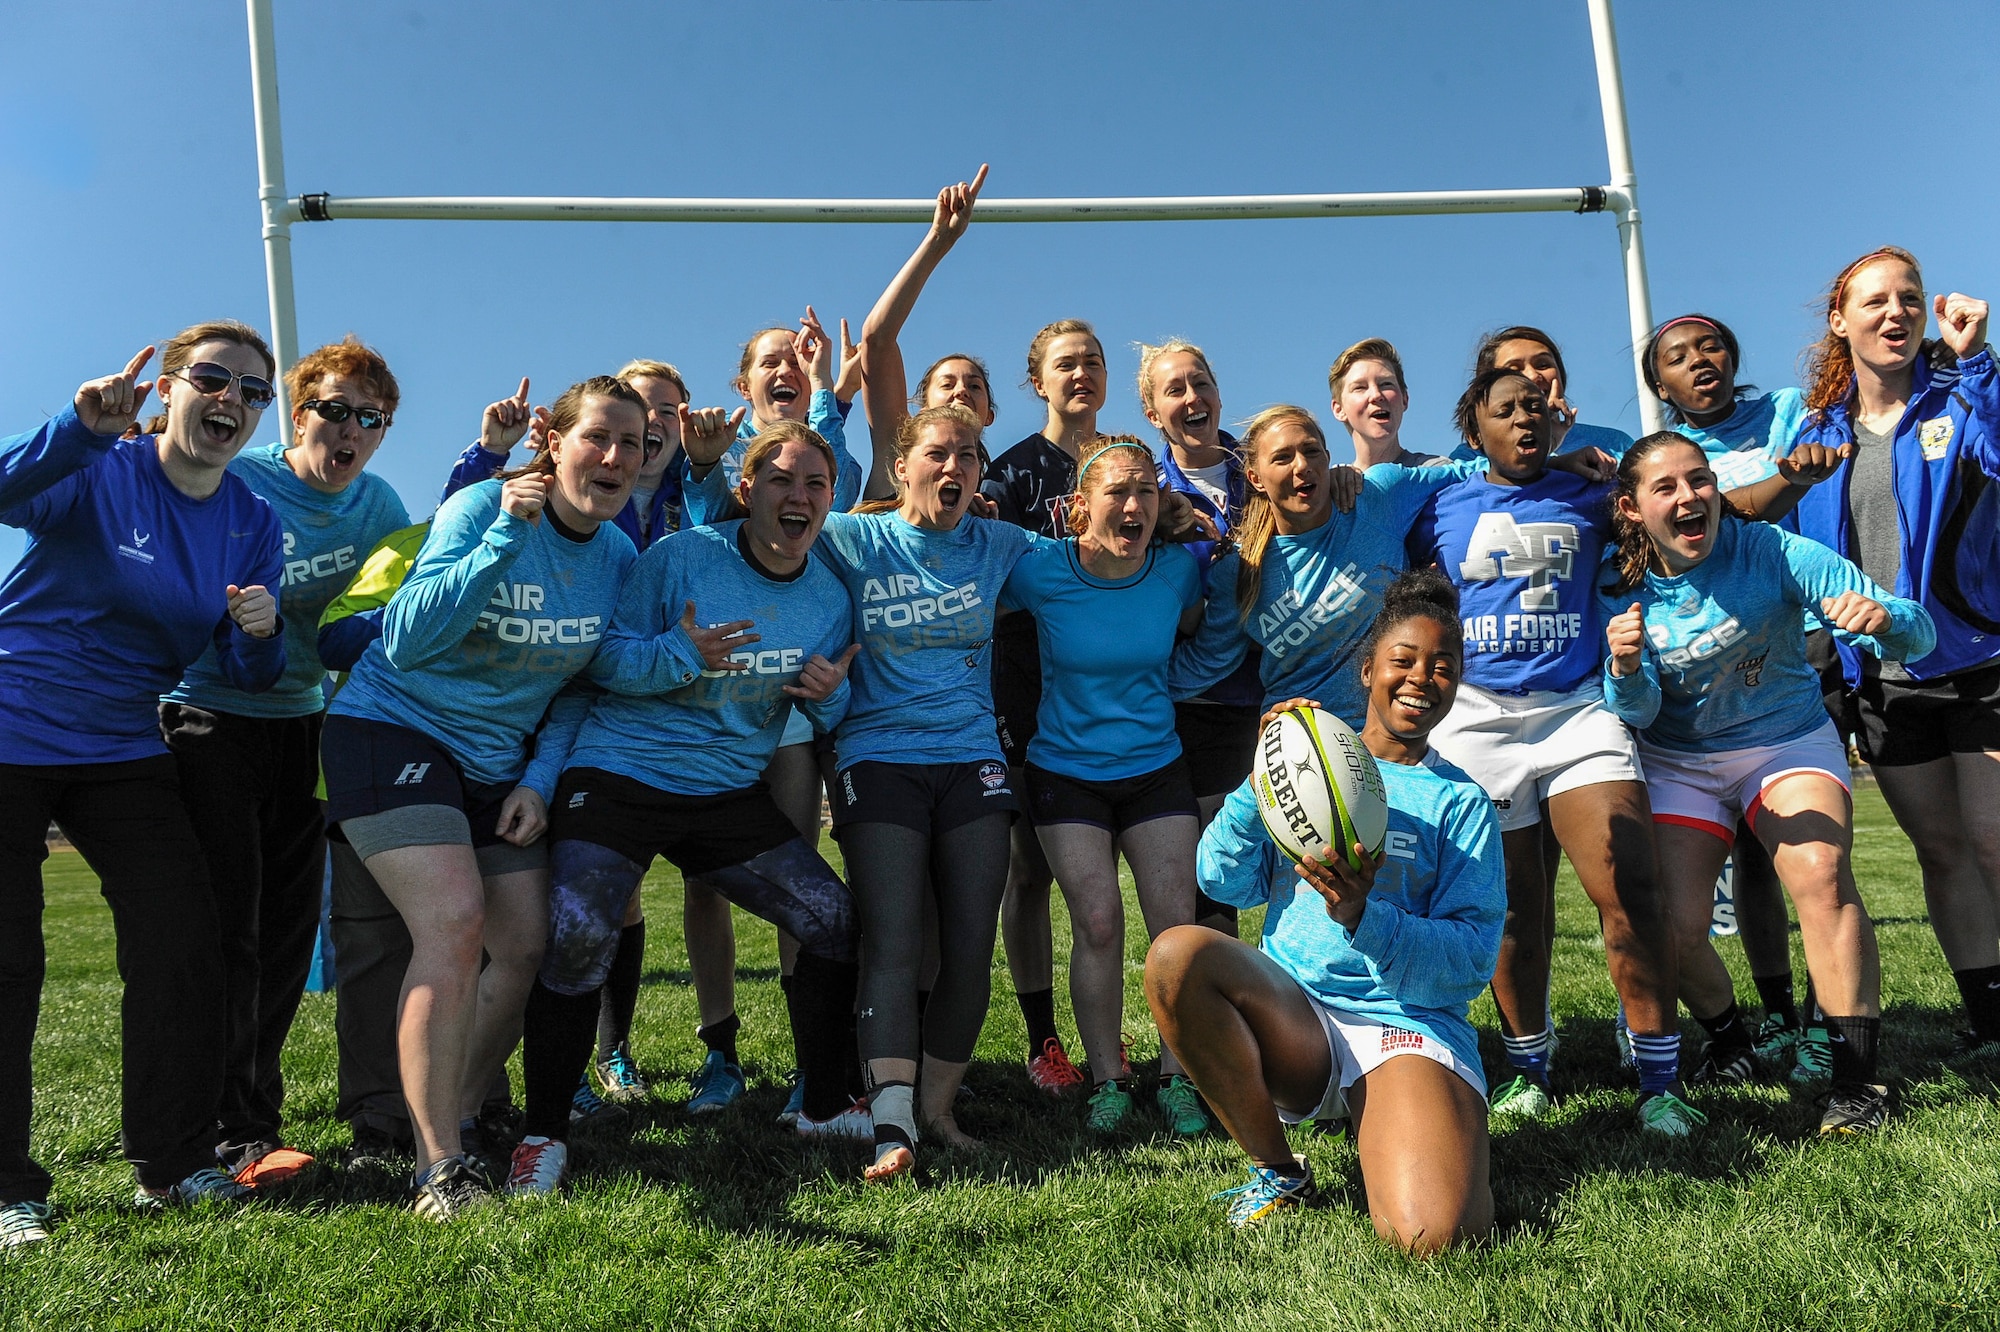 The Air Force women’s rugby sevens team huddles together after a practice in Las Vegas, March 1, 2017. The team, the Air Force’s first official women’s rugby team, is made up of 19 women from around the Air Force. (U.S. Air Force photo by Staff Sgt. Siuta B. Ika)